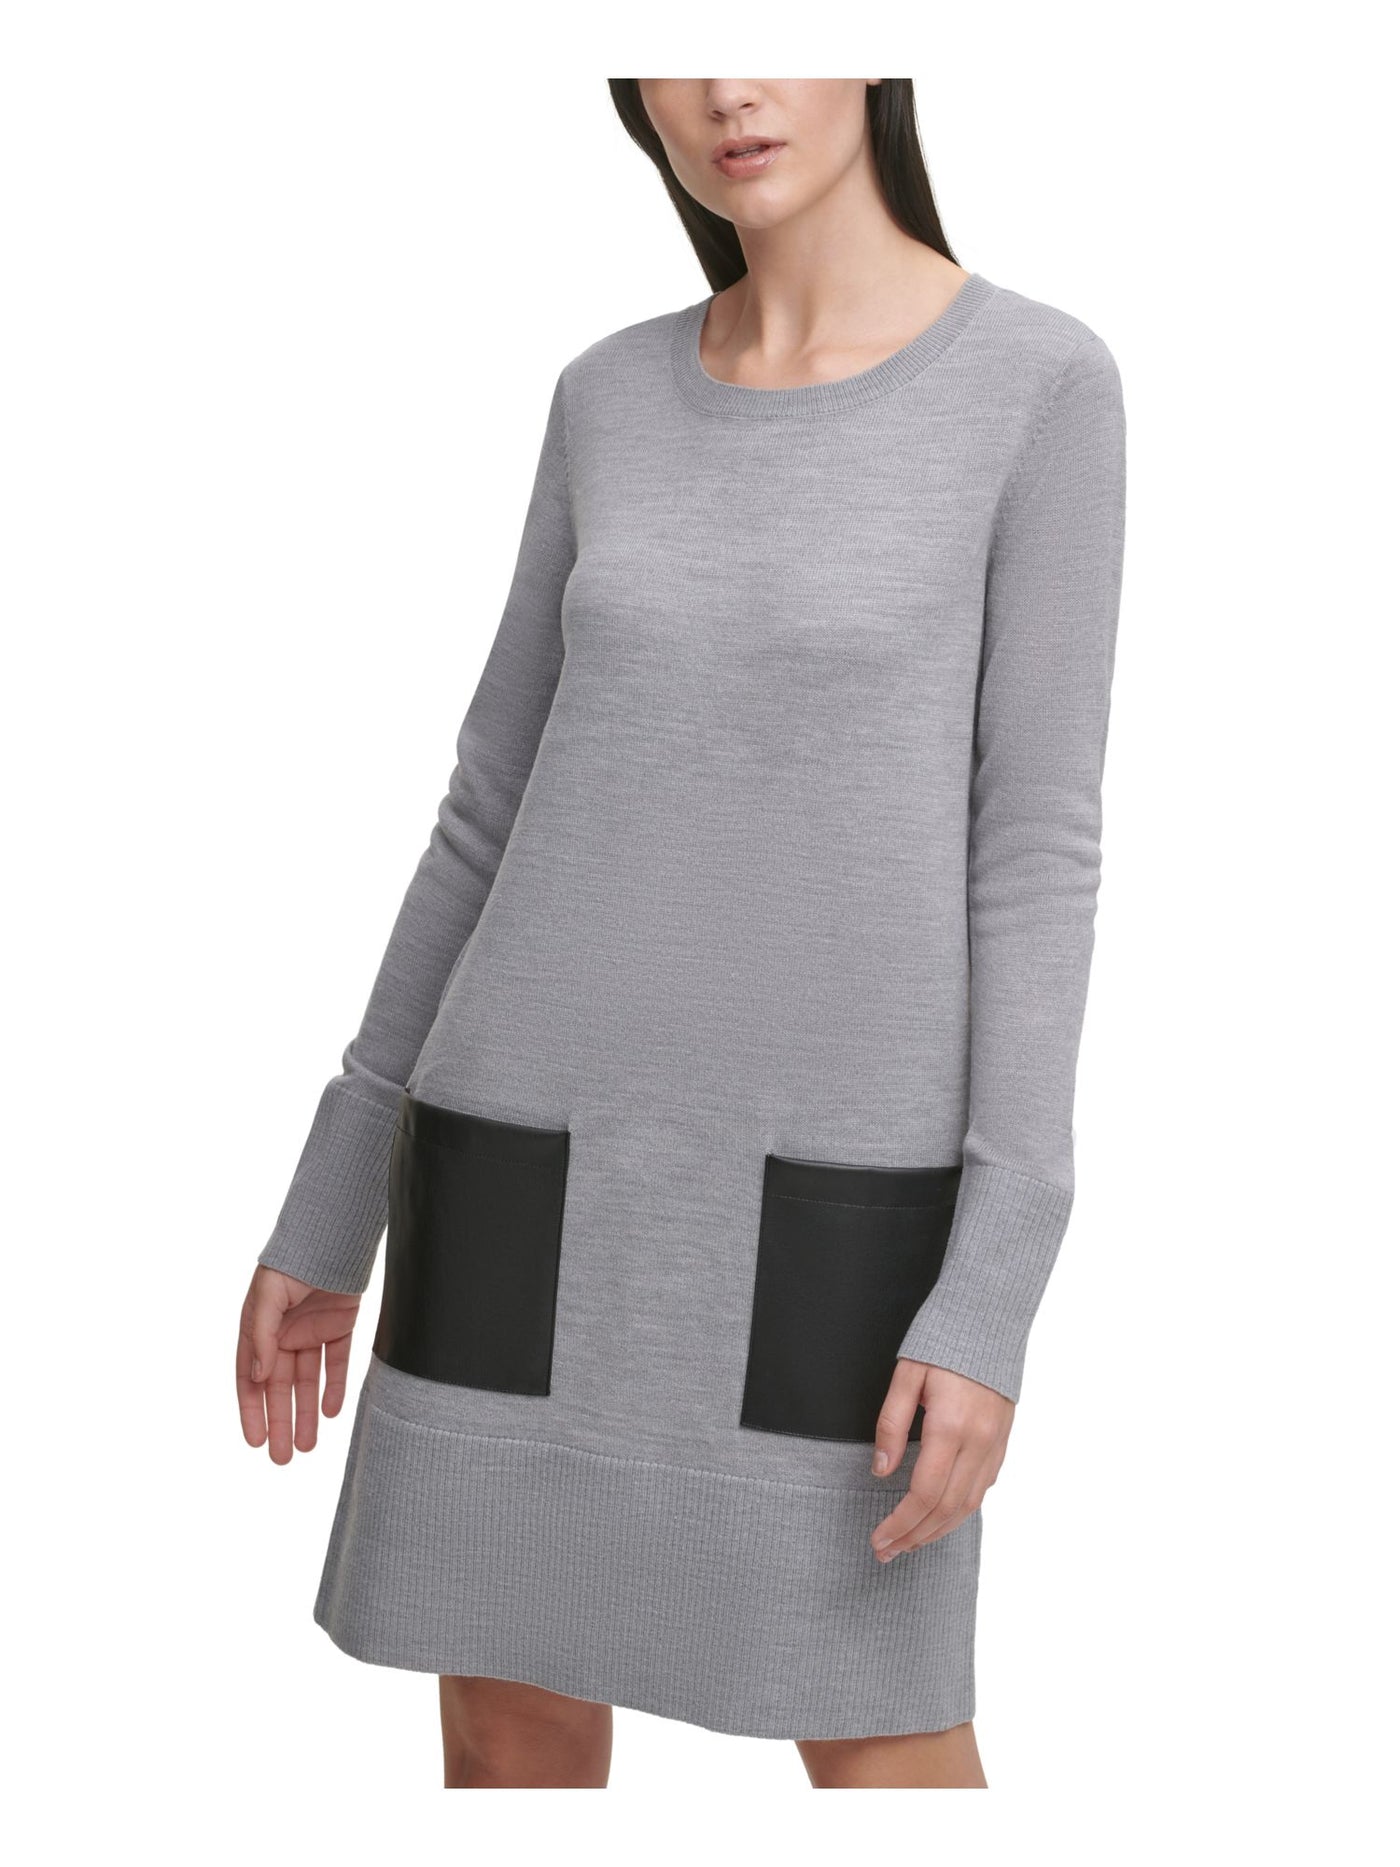 DKNY Womens Gray Pocketed Sweater Long Sleeve Crew Neck Above The Knee Shift Dress XL